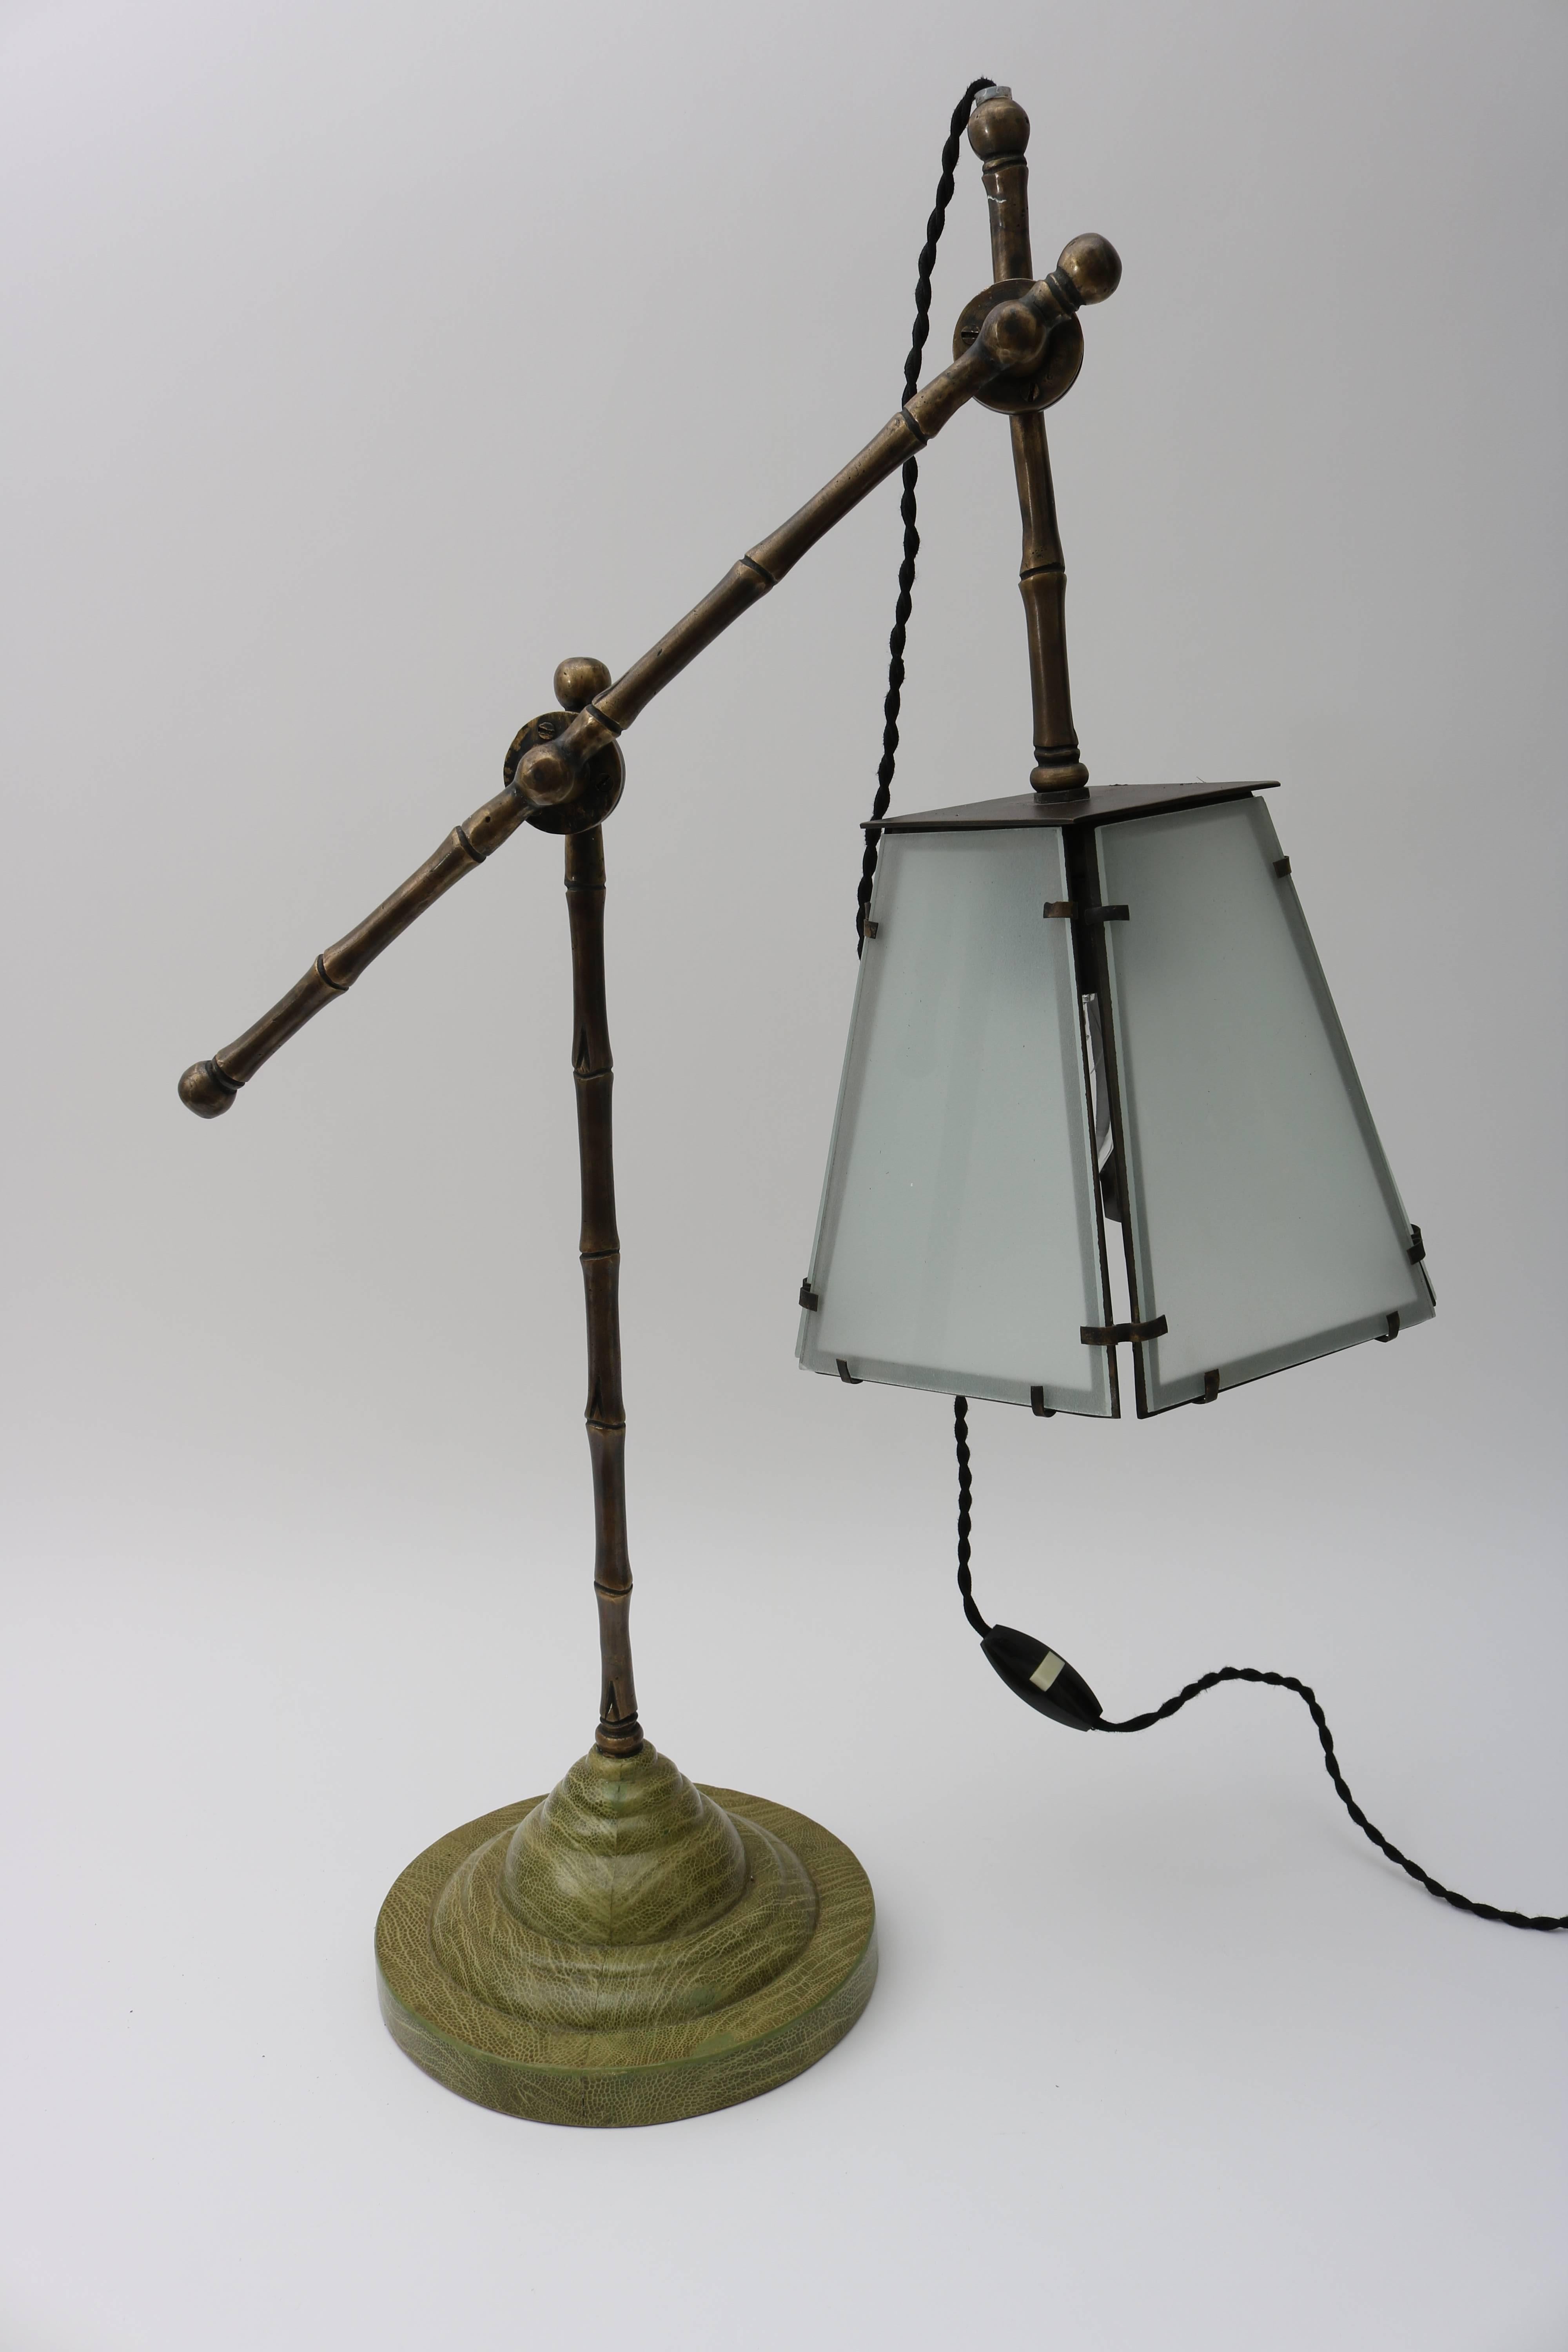 This stylish Art Deco inspired table lamp with its adjustable arm, frosted glass shade and green coloration lizard base will make the perfect addition to your desk or perhaps dressing table.

Note: Base diameter is 7.50